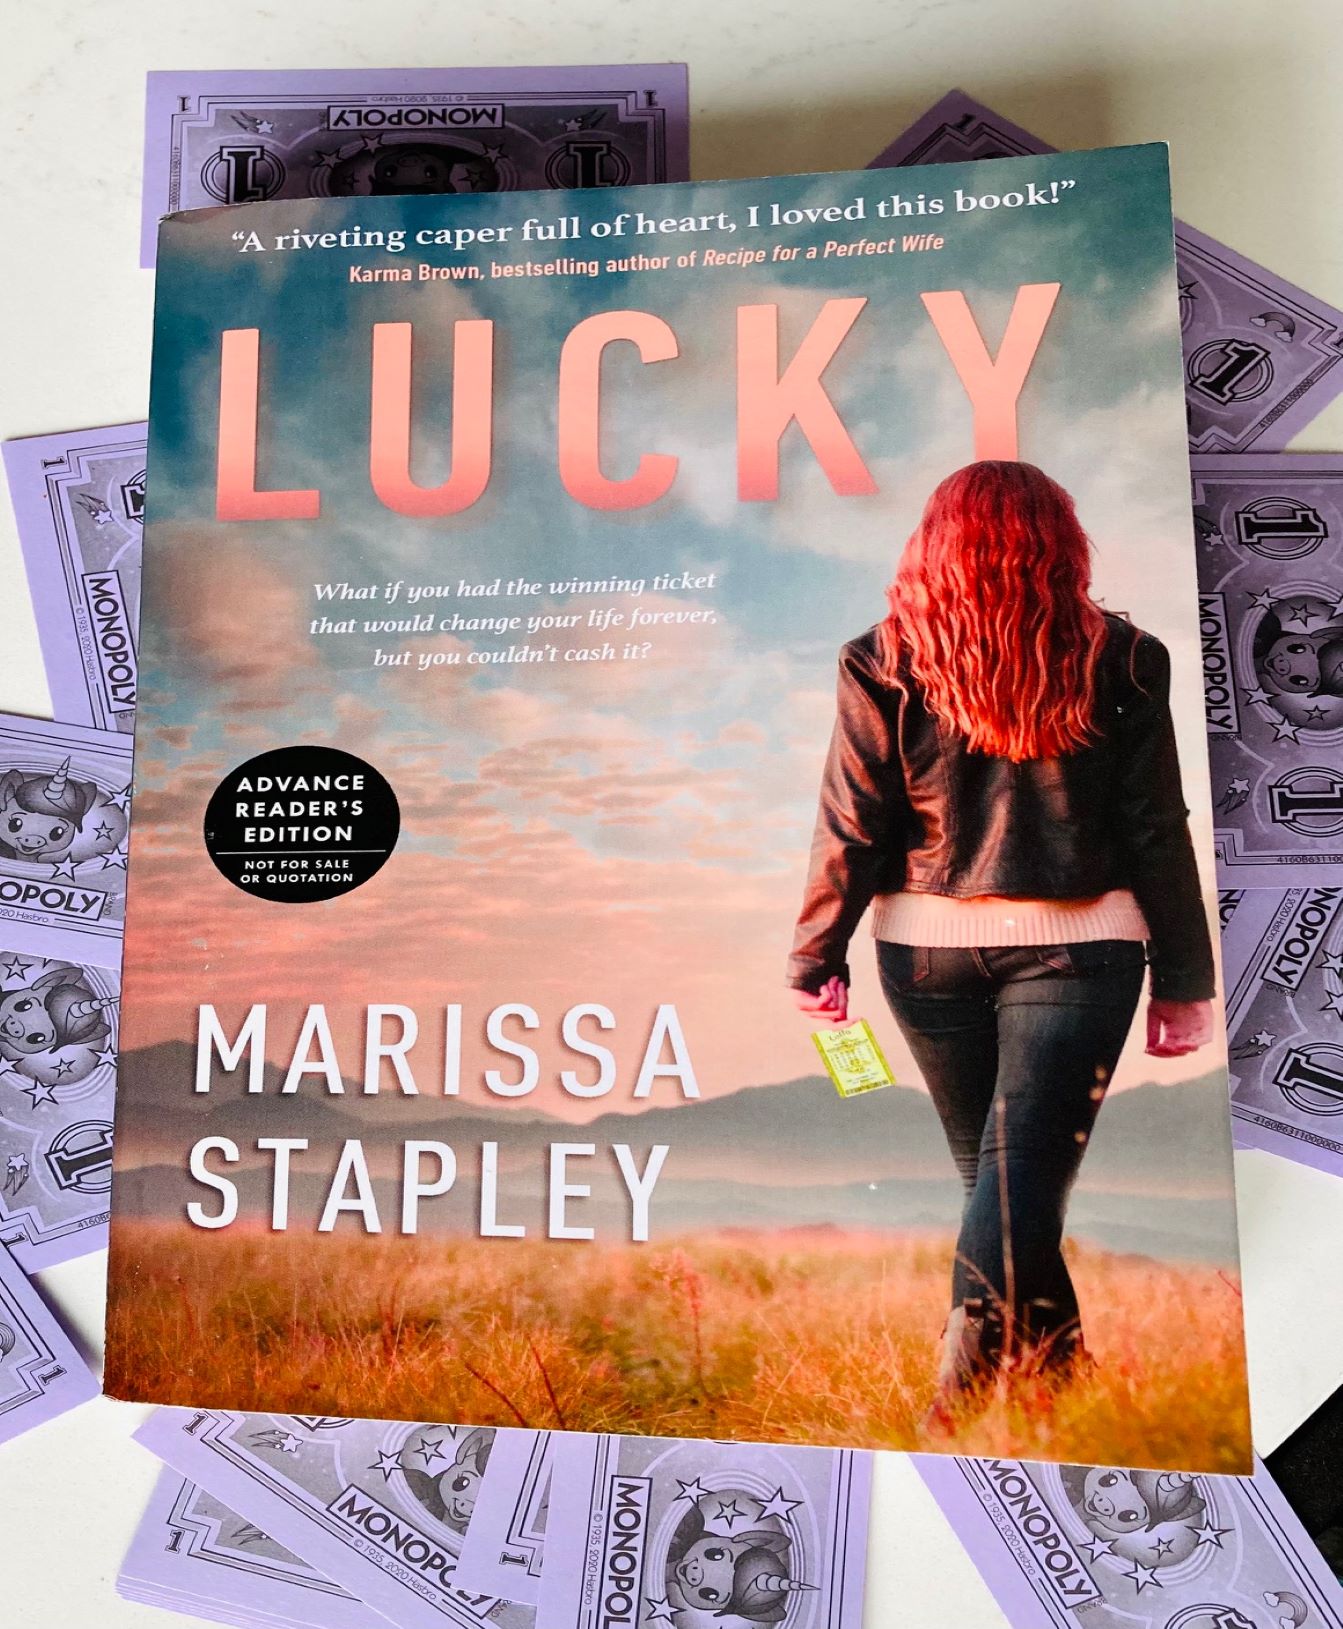 Lucky by Marissa Stapley book on top of purple monopoly play money